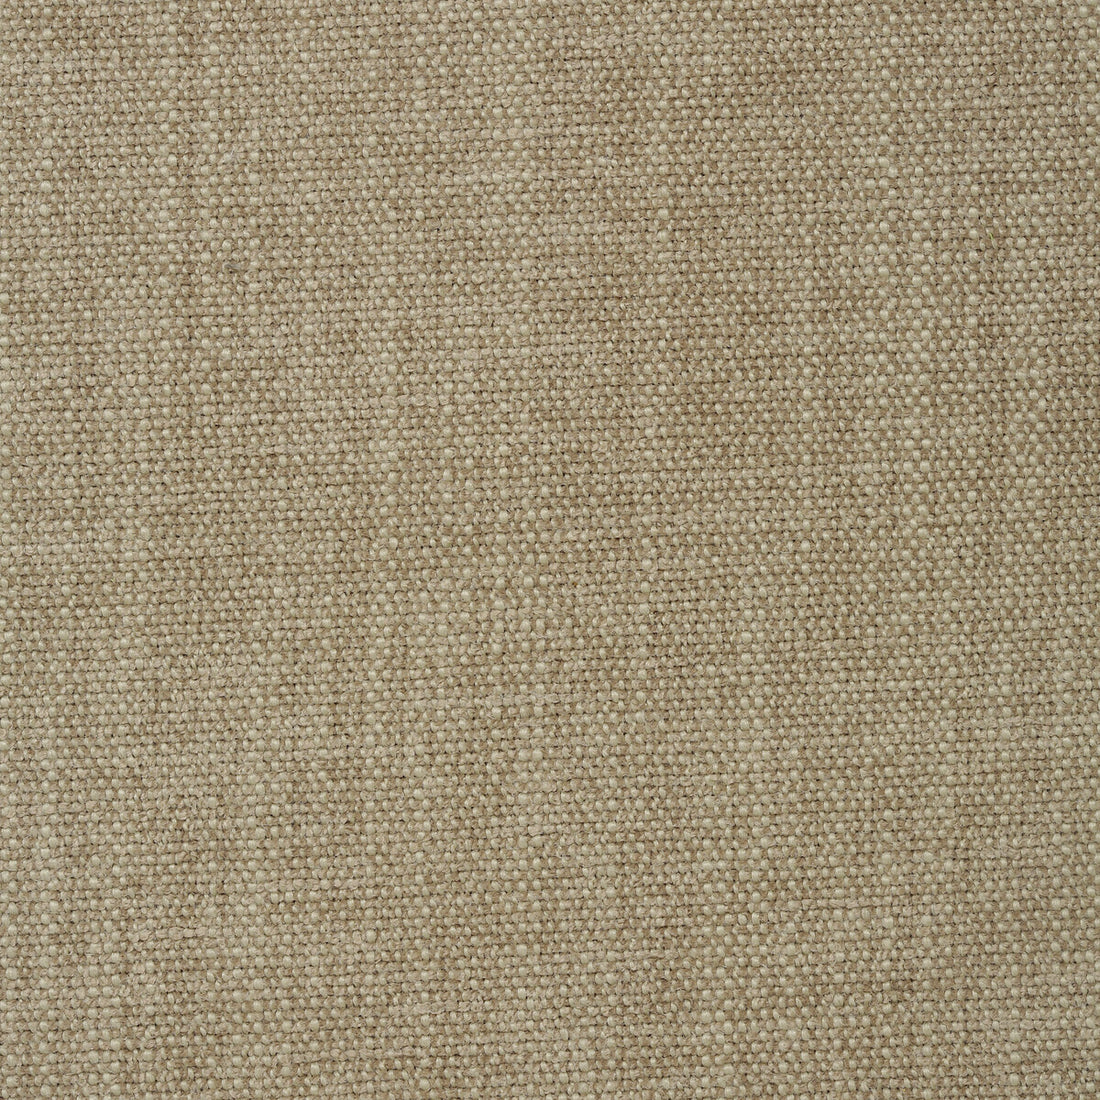 Kravet Smart fabric in 35113-16 color - pattern 35113.16.0 - by Kravet Smart in the Performance Crypton Home collection